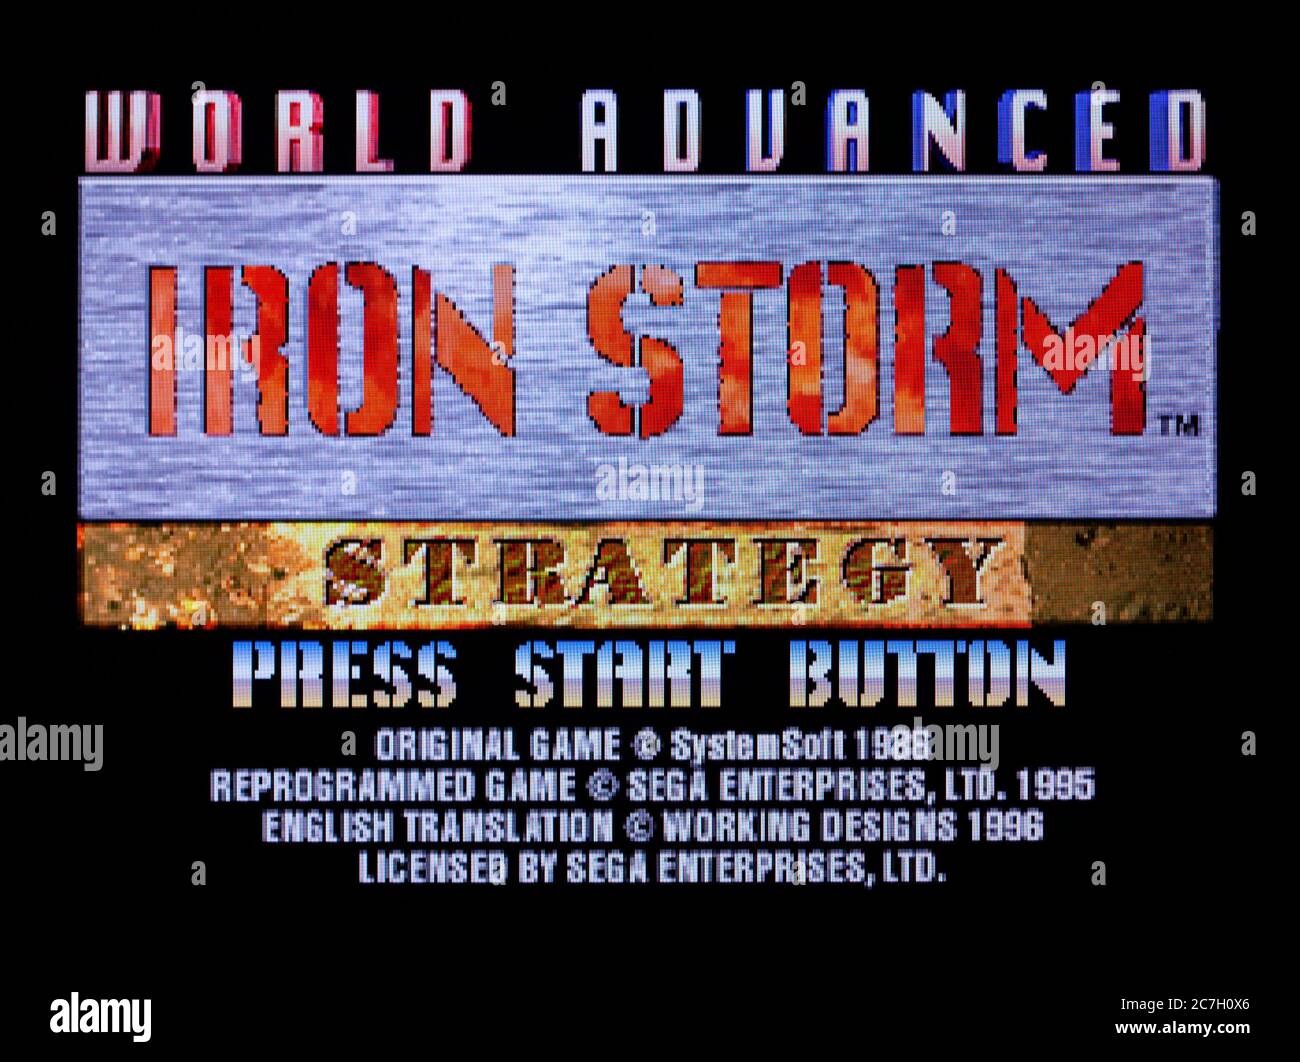 Iron Storm - Sega Saturn Videogame - Editorial use only Stock Photo